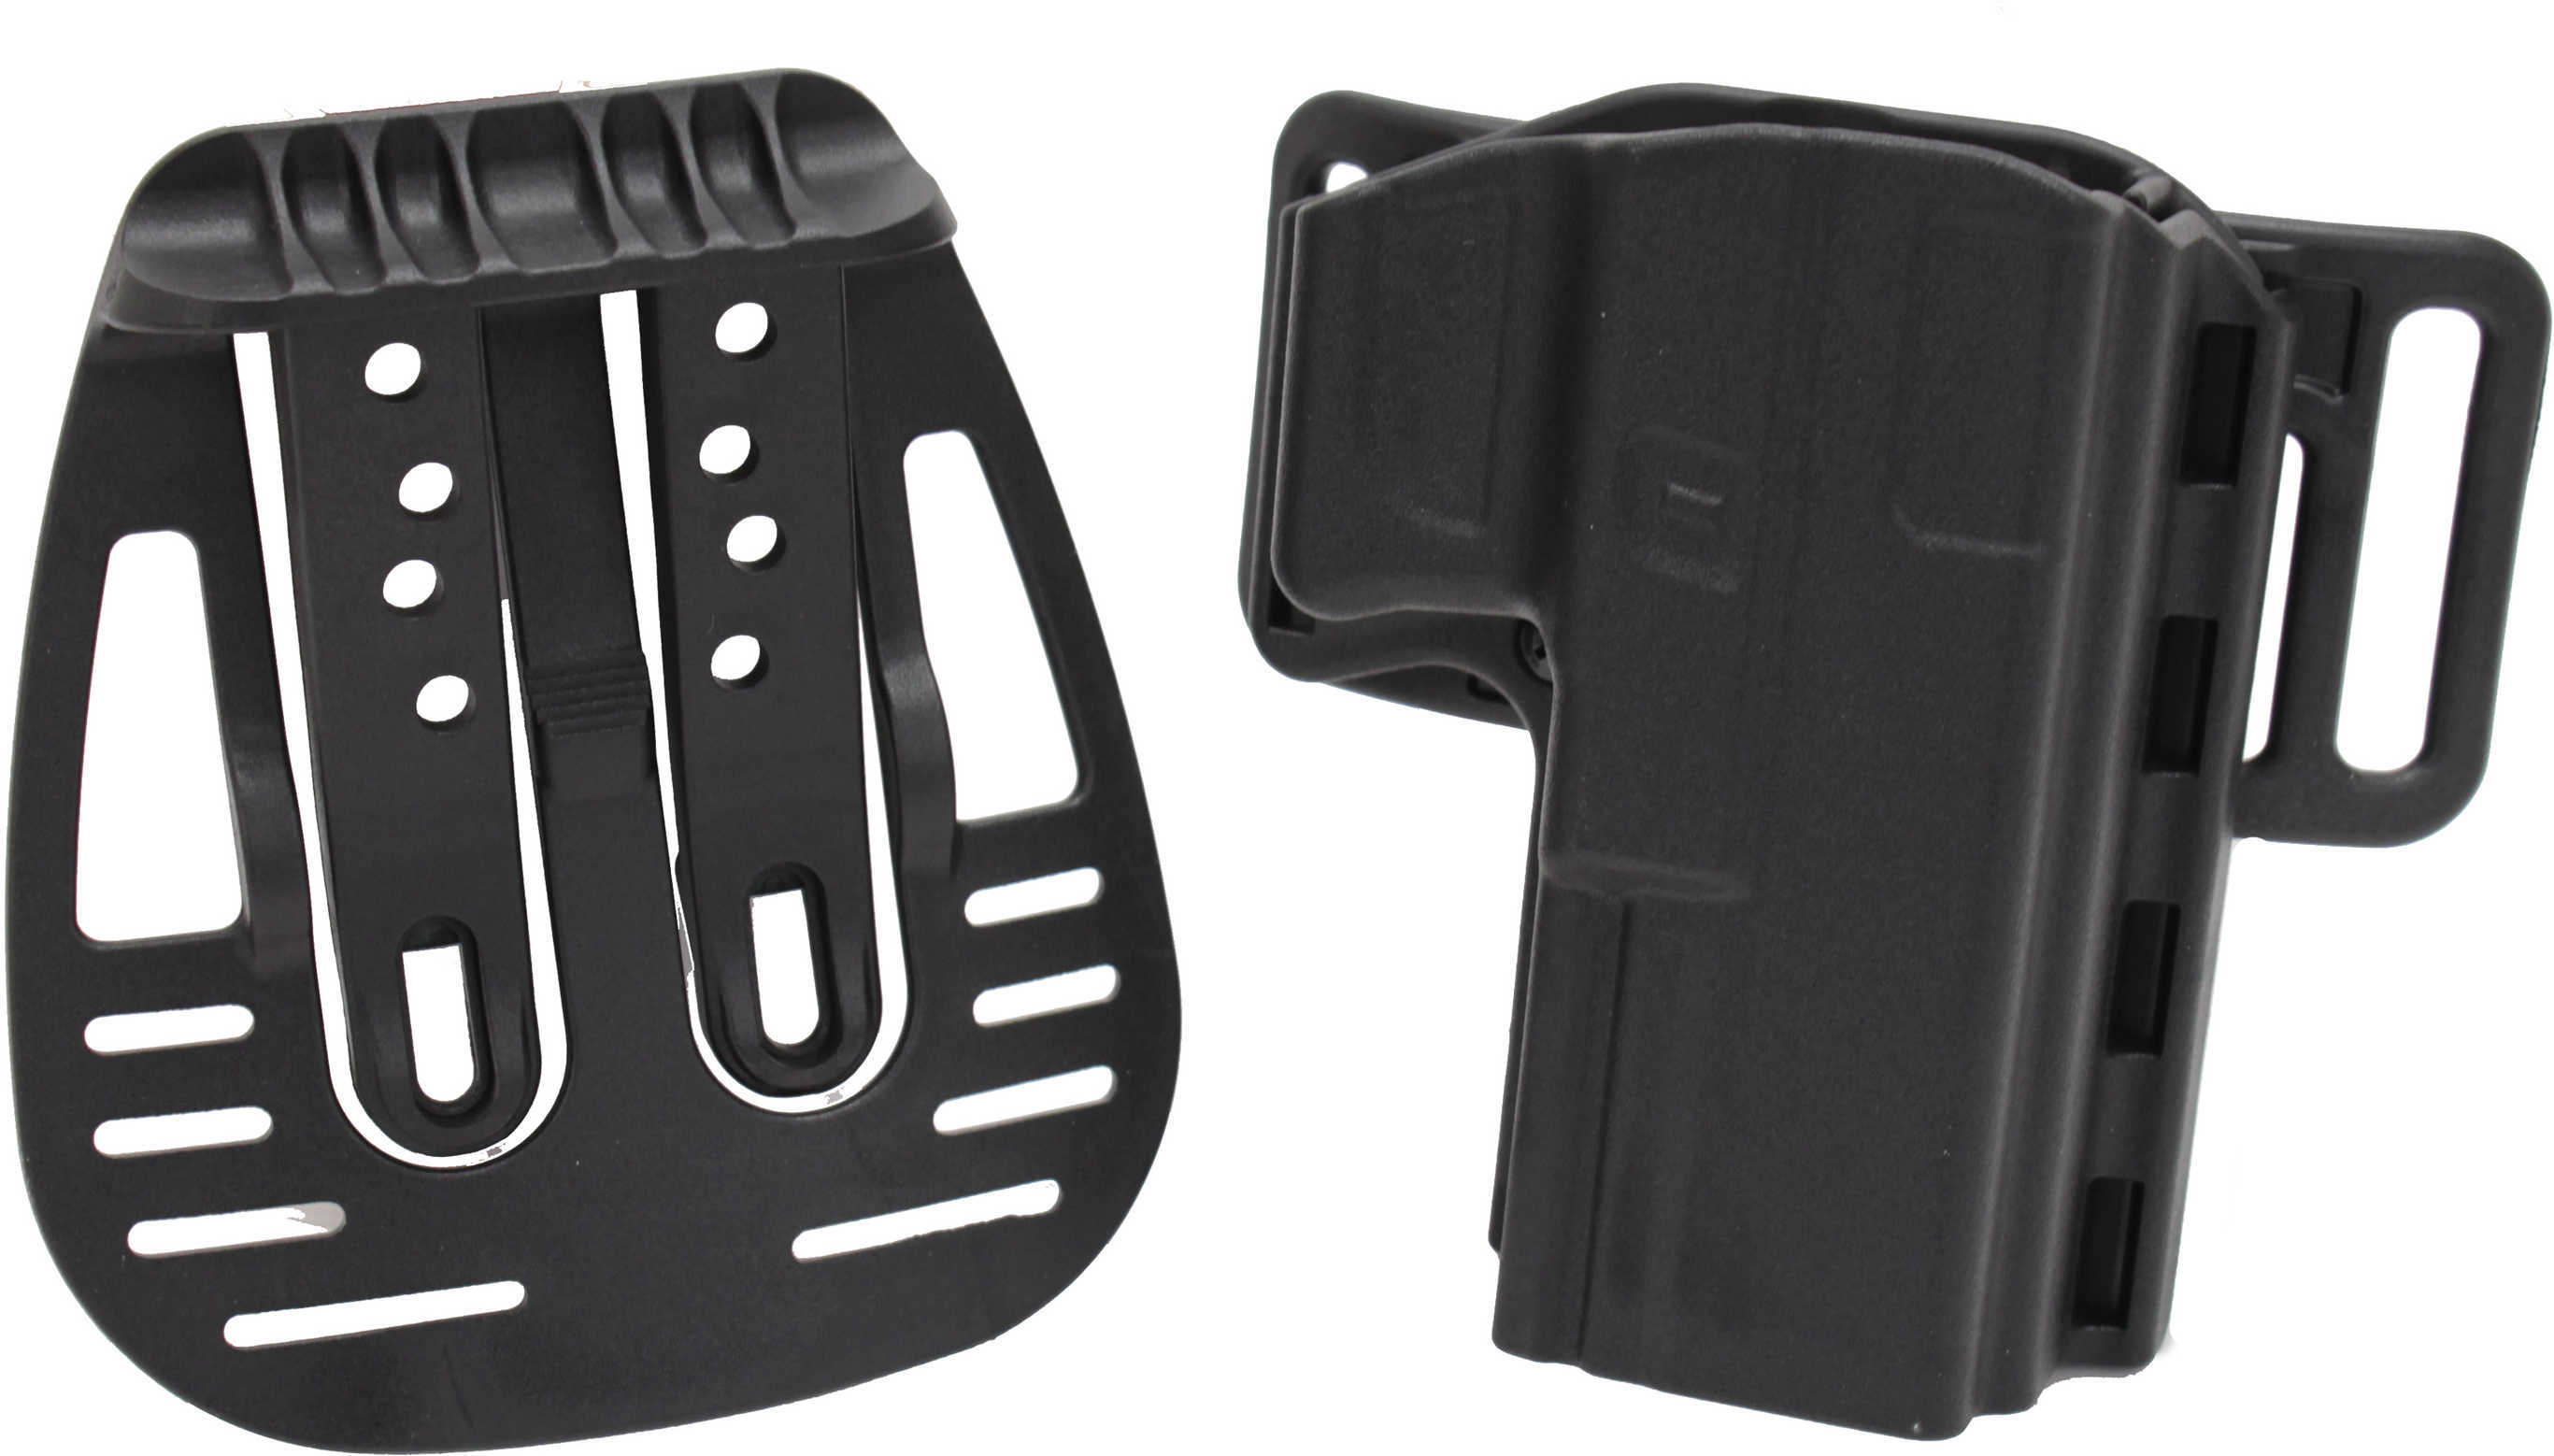 Uncle Mikes Reflex Holster Size 21 Rh for Glock 17/22/19/23